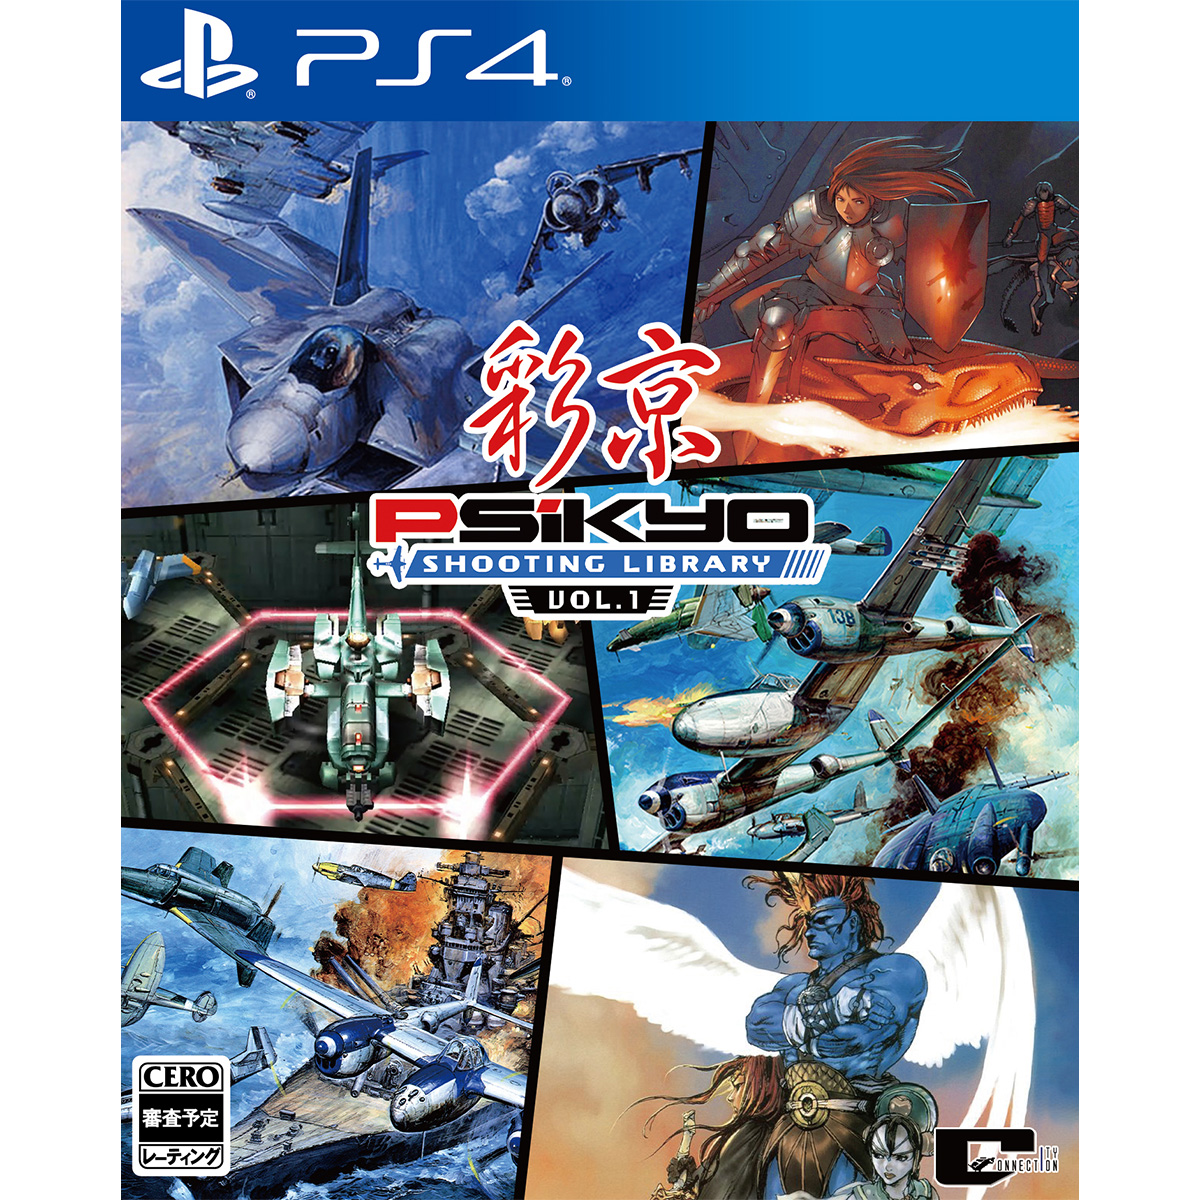 ［PS4］彩京 SHOOTING LIBRARY Vol.1